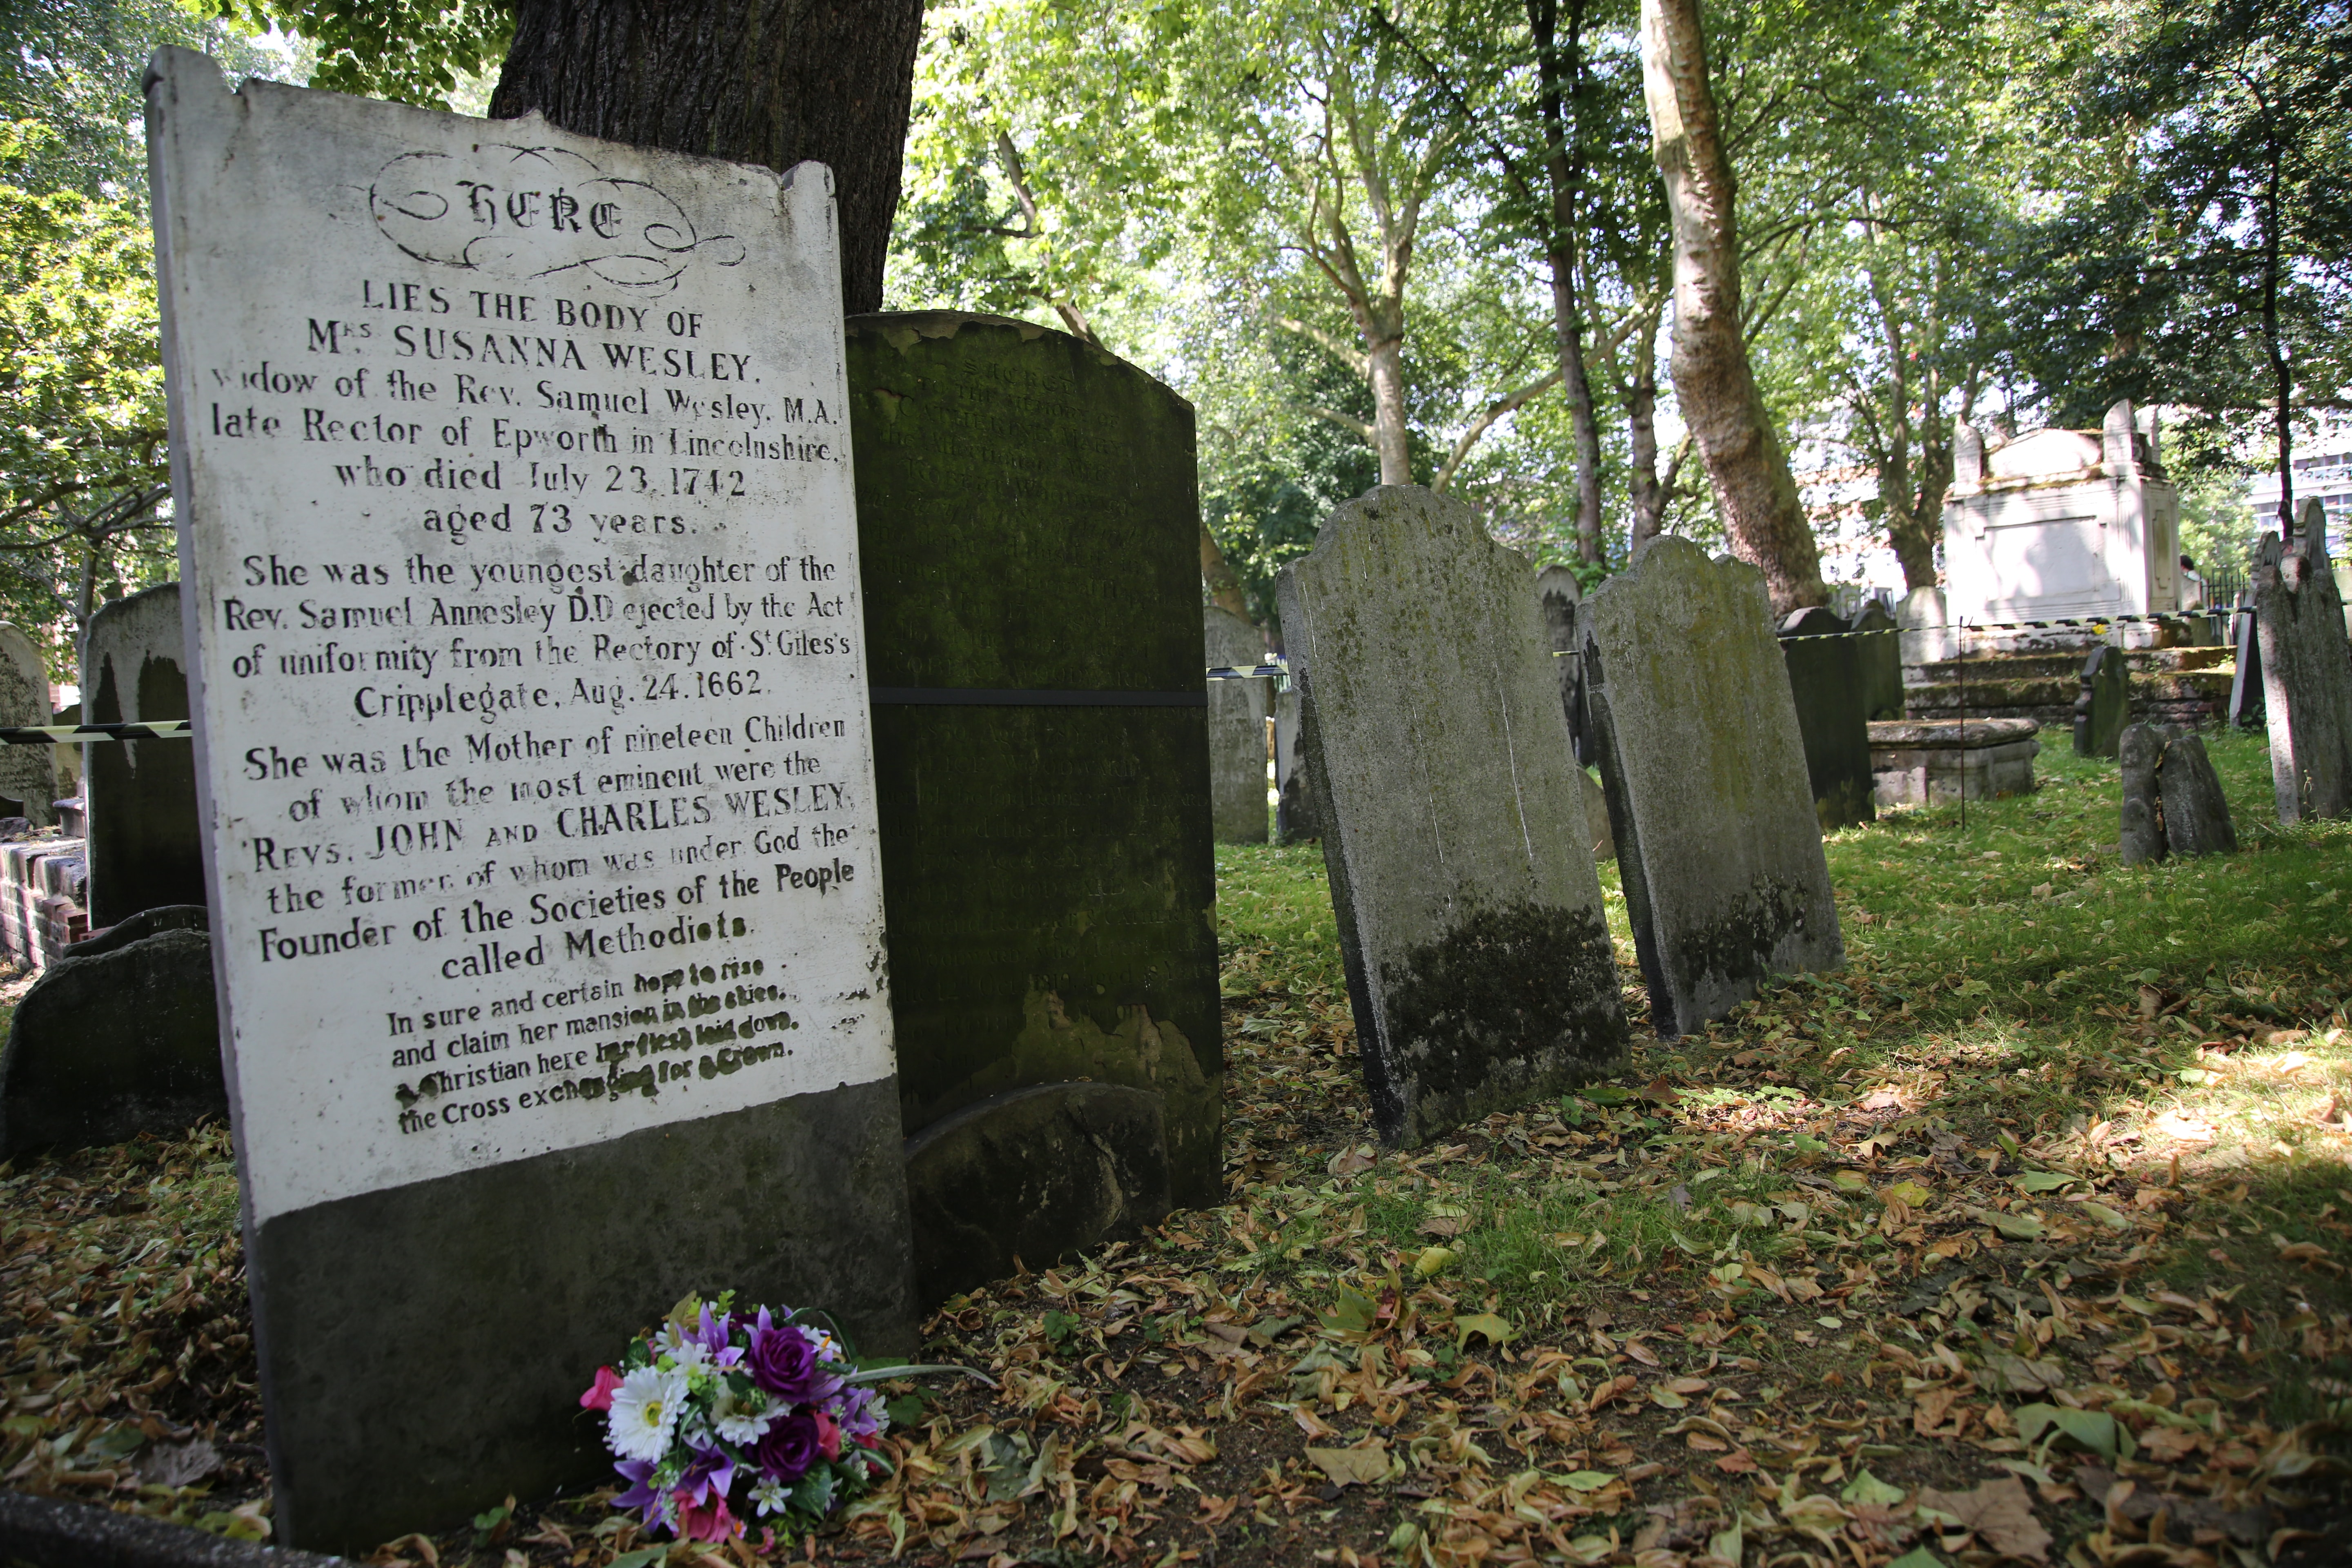 Gravestone of Susanna Wesley at the Dissenter's Cemetery across from Wesley Chapel, London, UK.